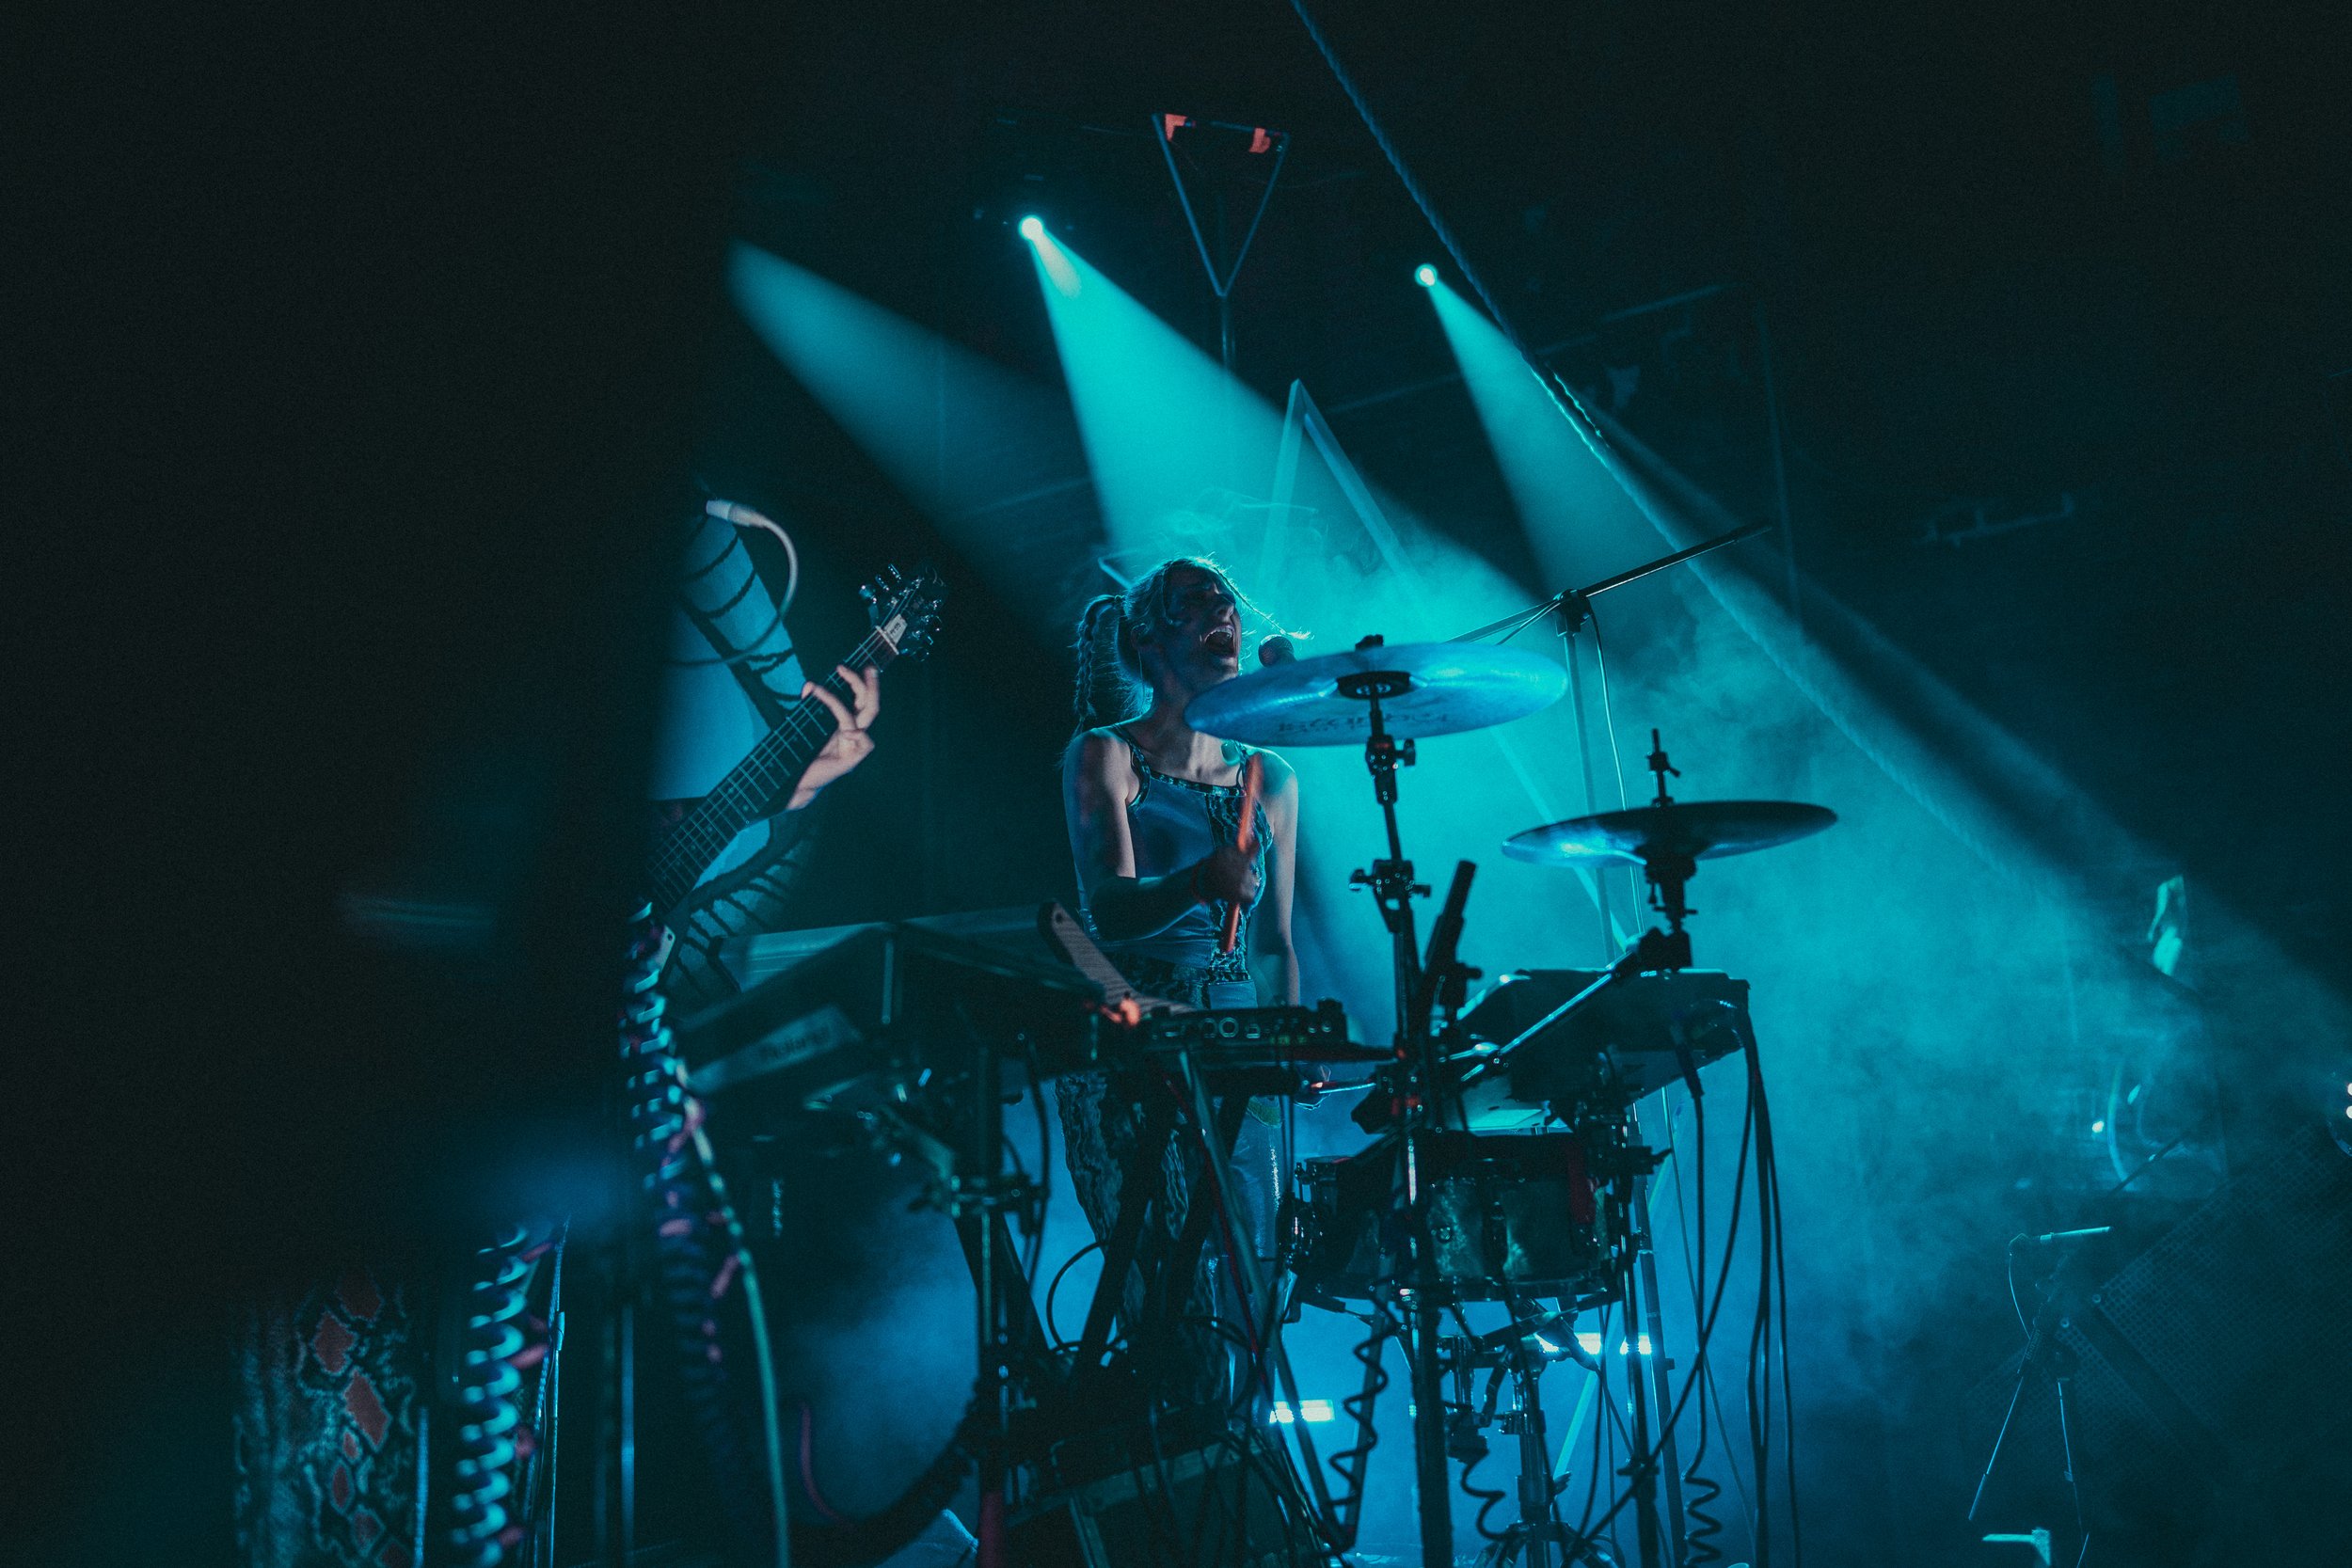 Female drummer on stage, laughing and enjoying music, covered by blue light